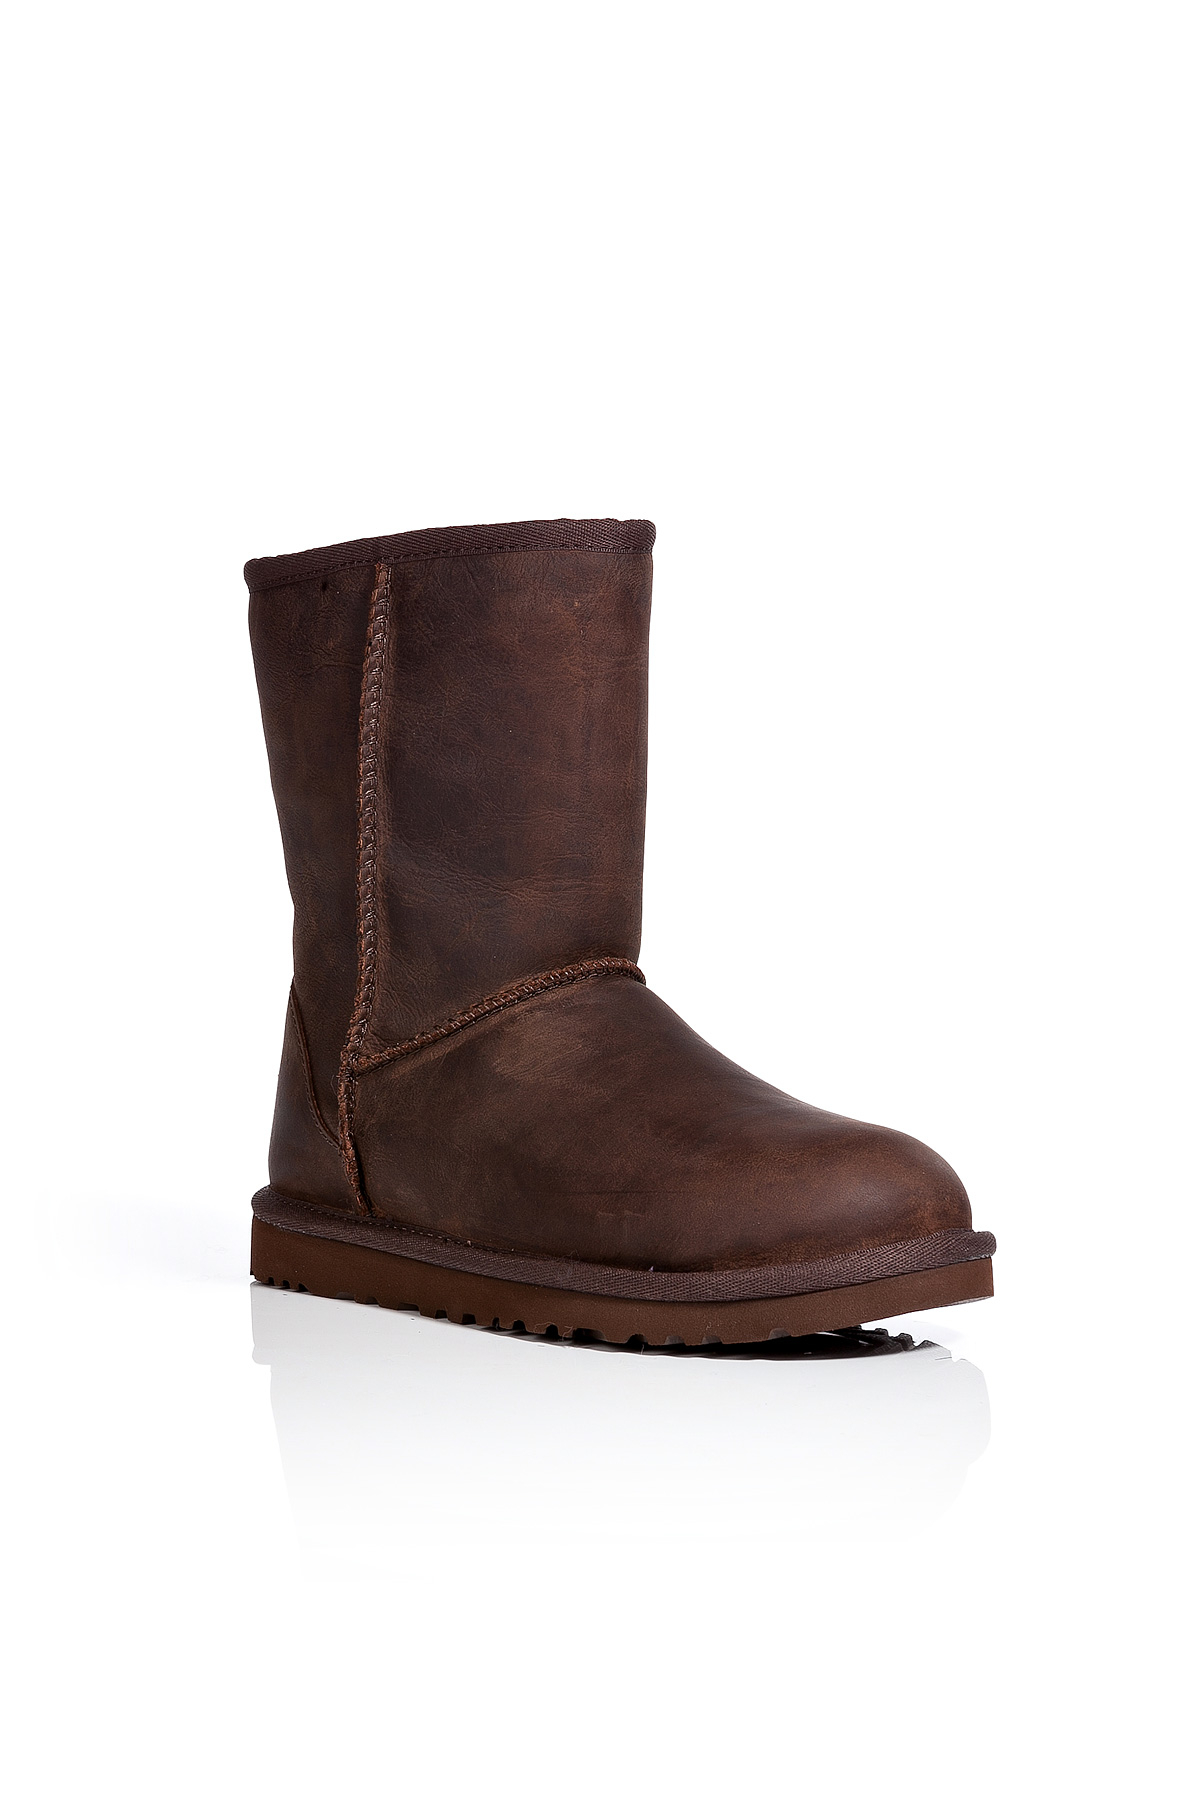 ugg brown leather boots